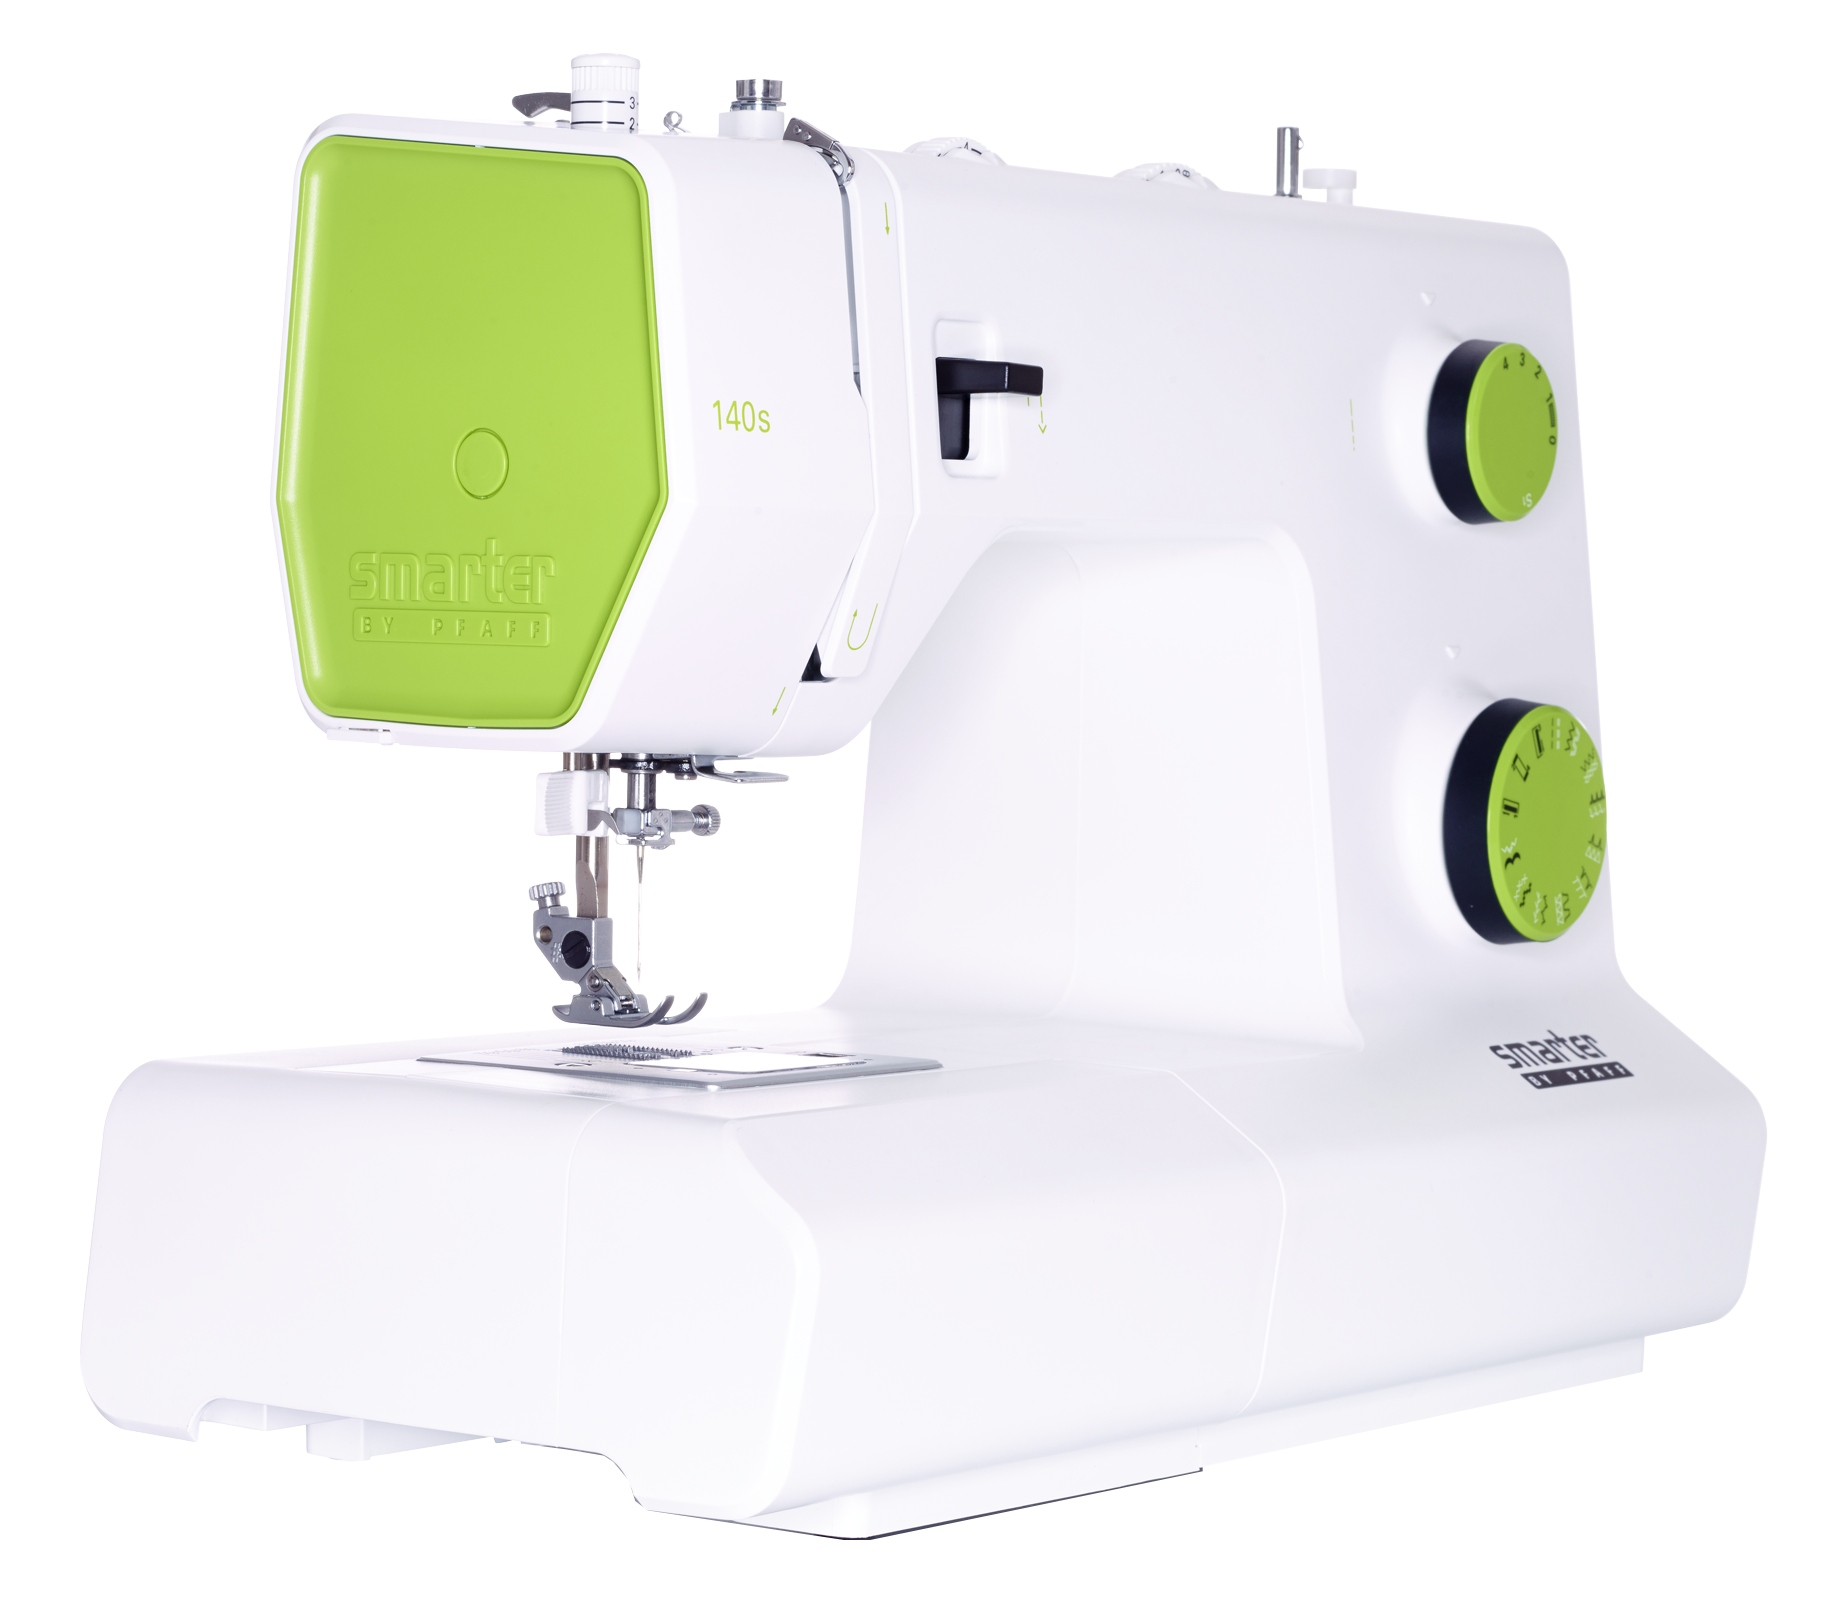 Best Starter Sewing Machine | Pfaff Smarter 140s | Easy To Use